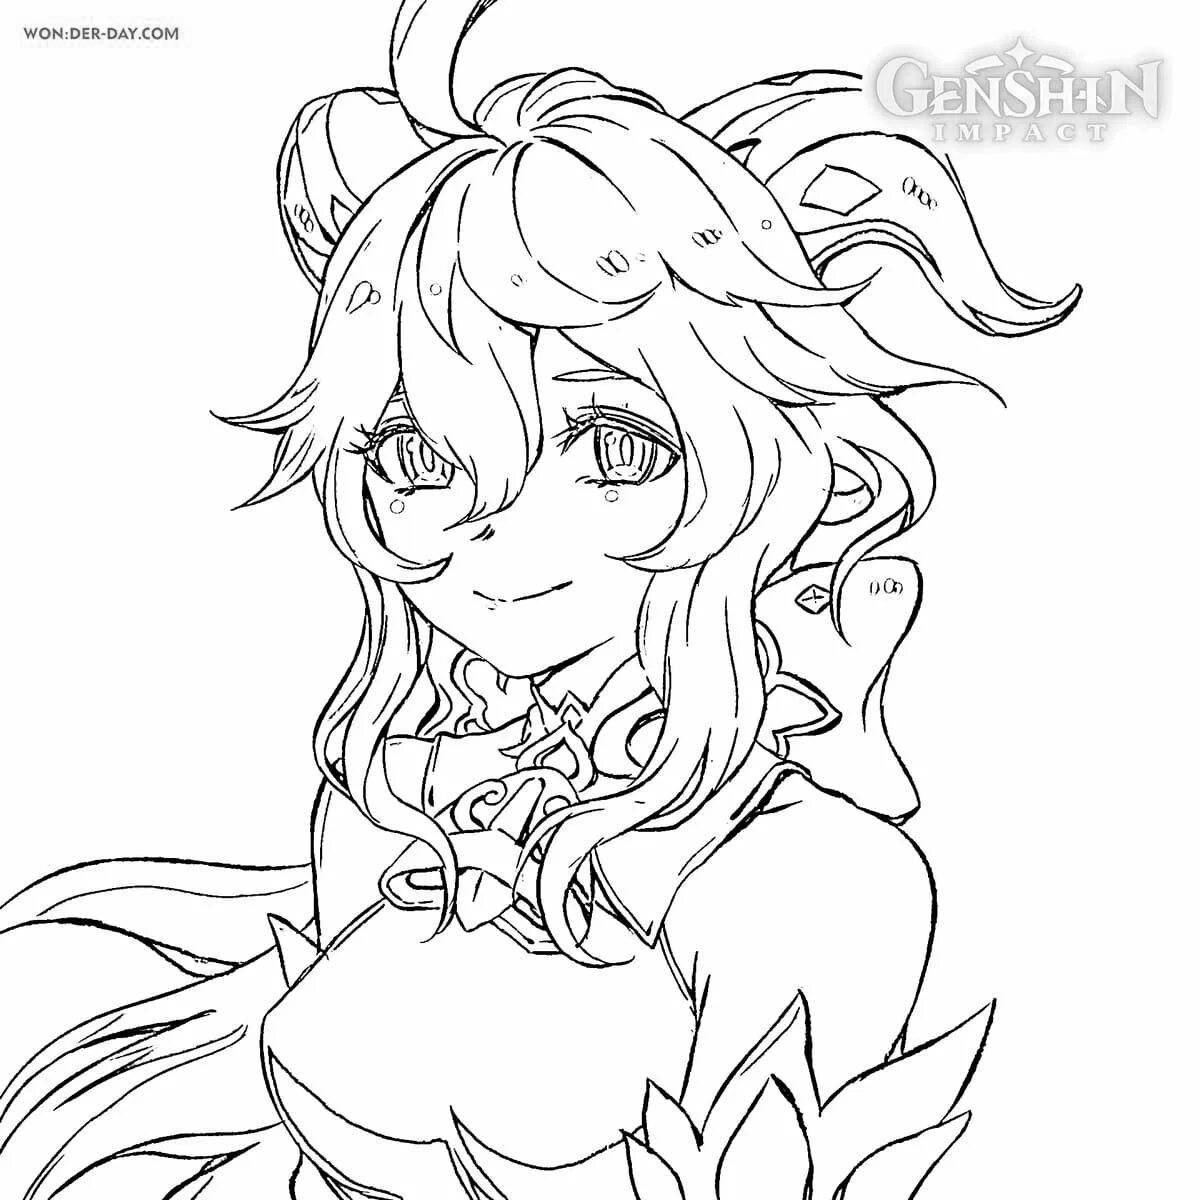 Ayaka genshin fairy tale coloring page